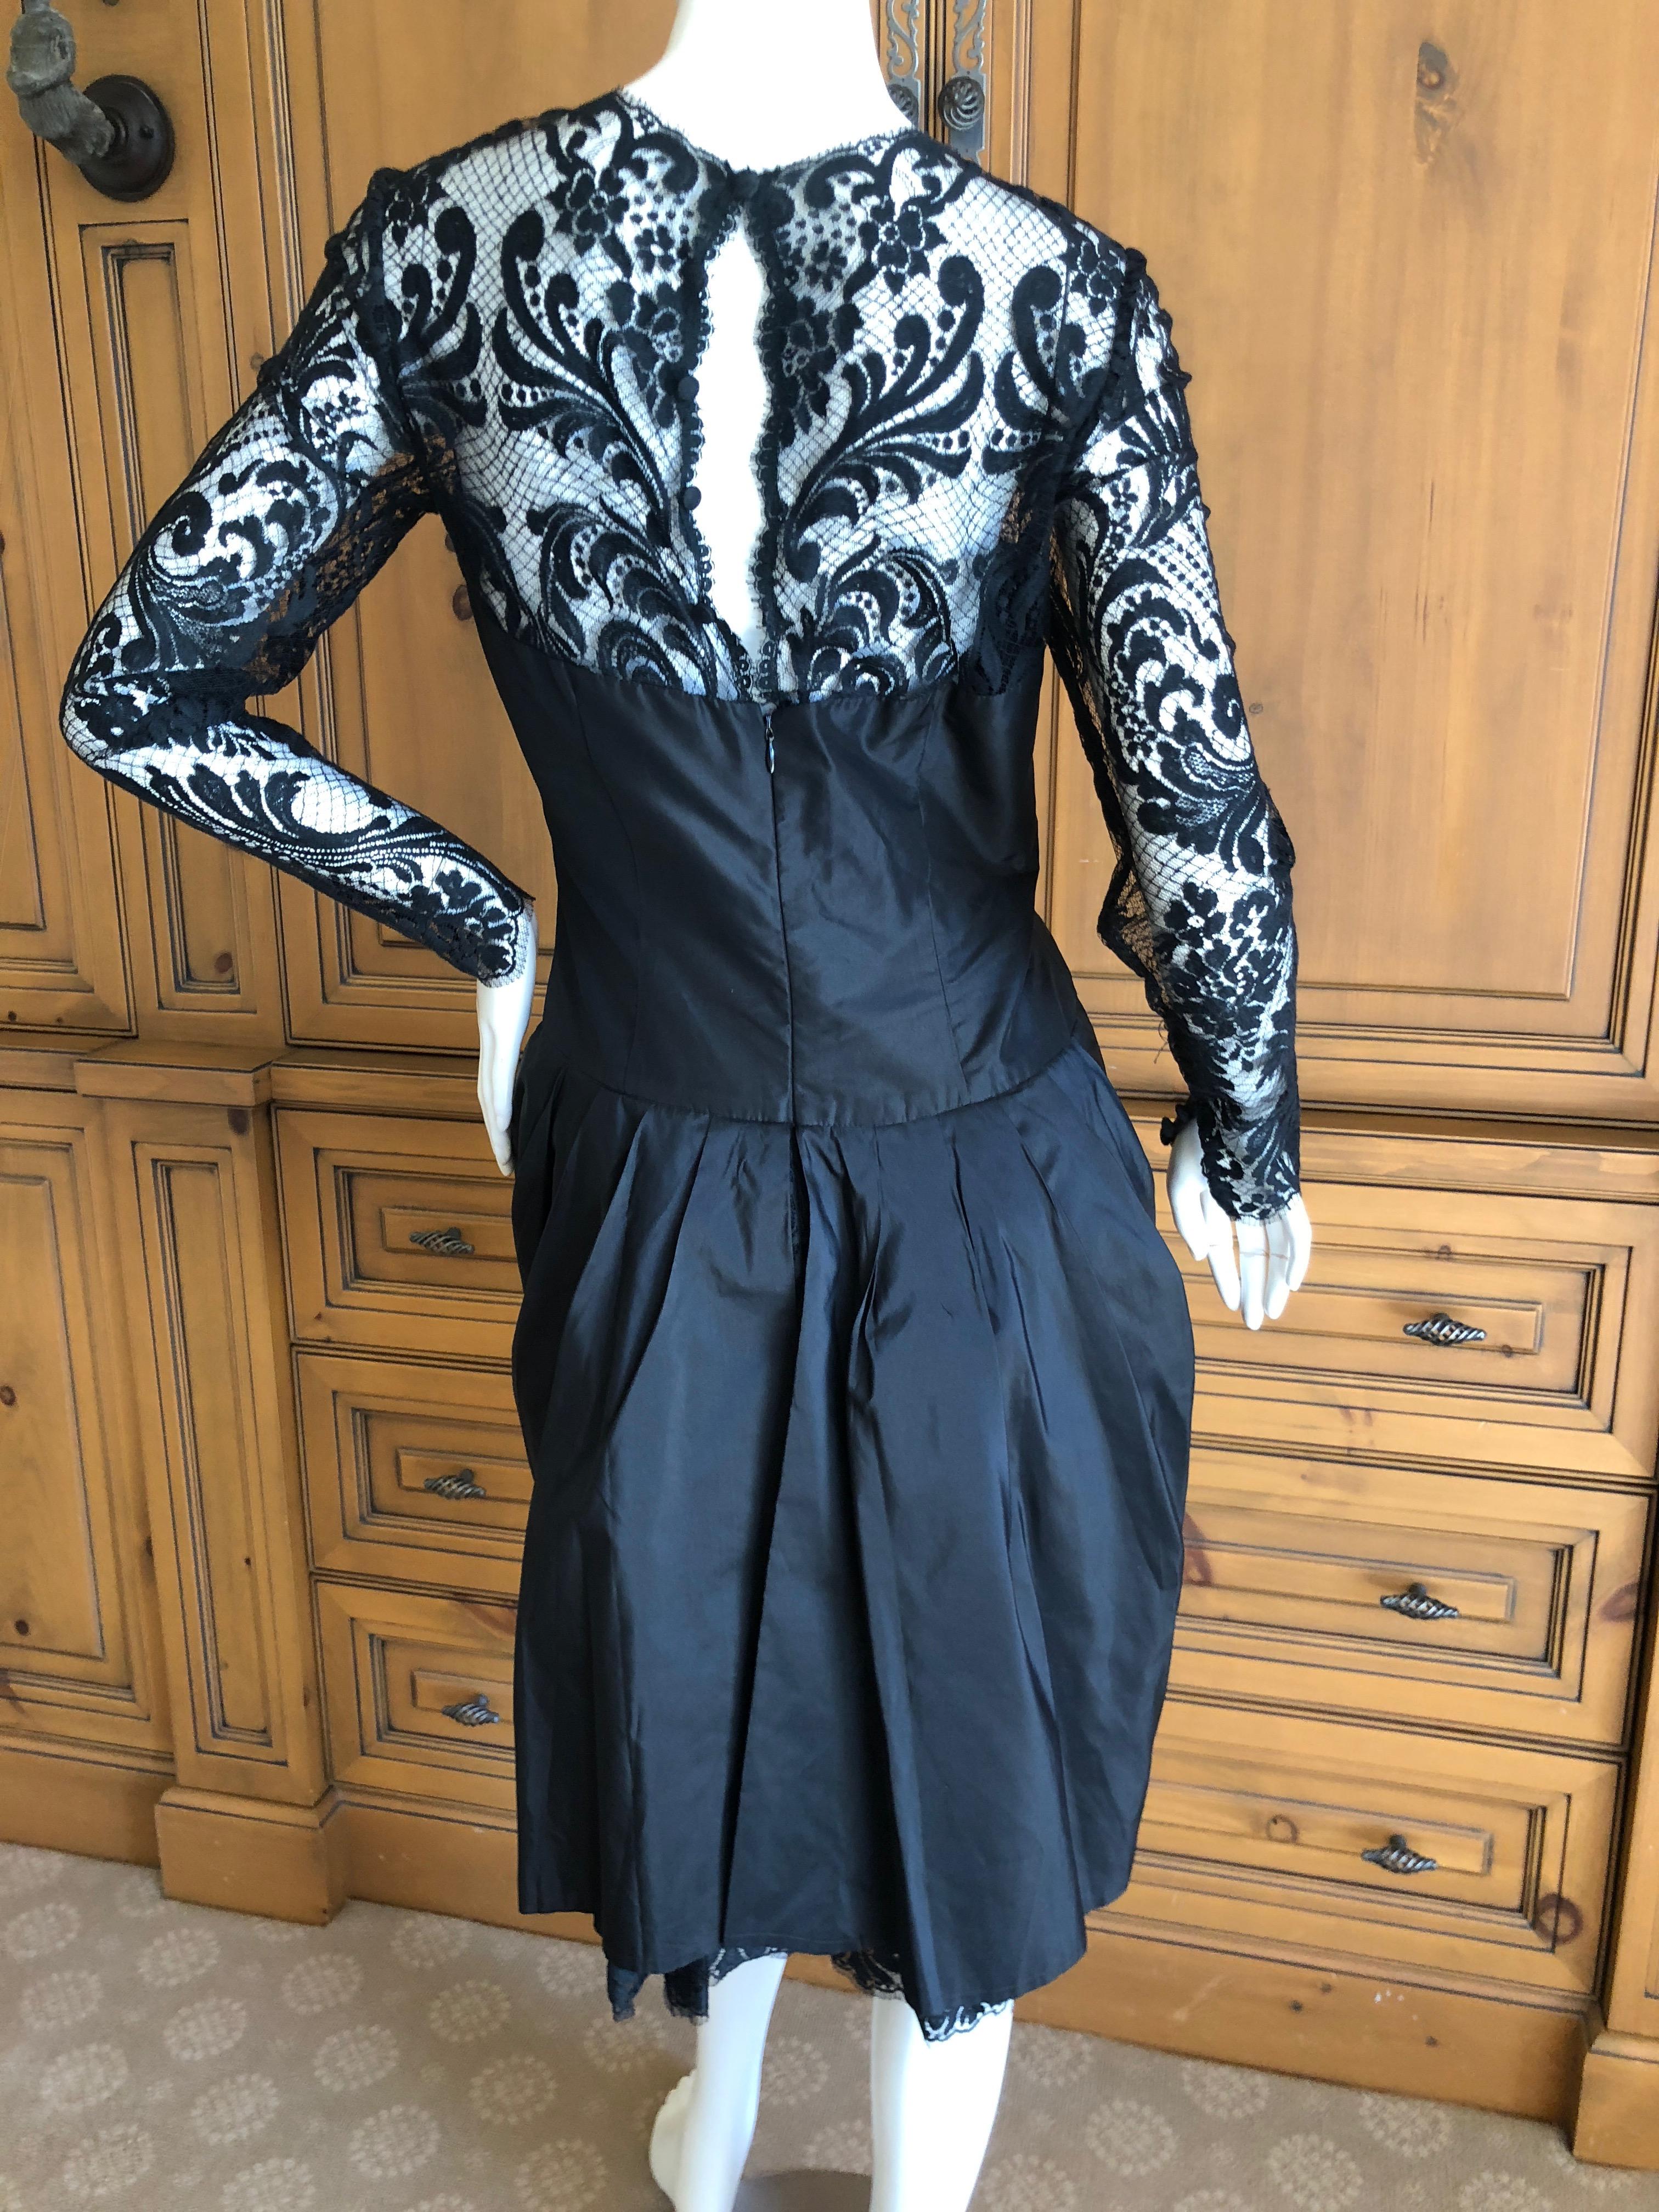 Bill Blass for Saks Fifth Avenue 80's Lace Accented Black Silk Cocktail Dress For Sale 1